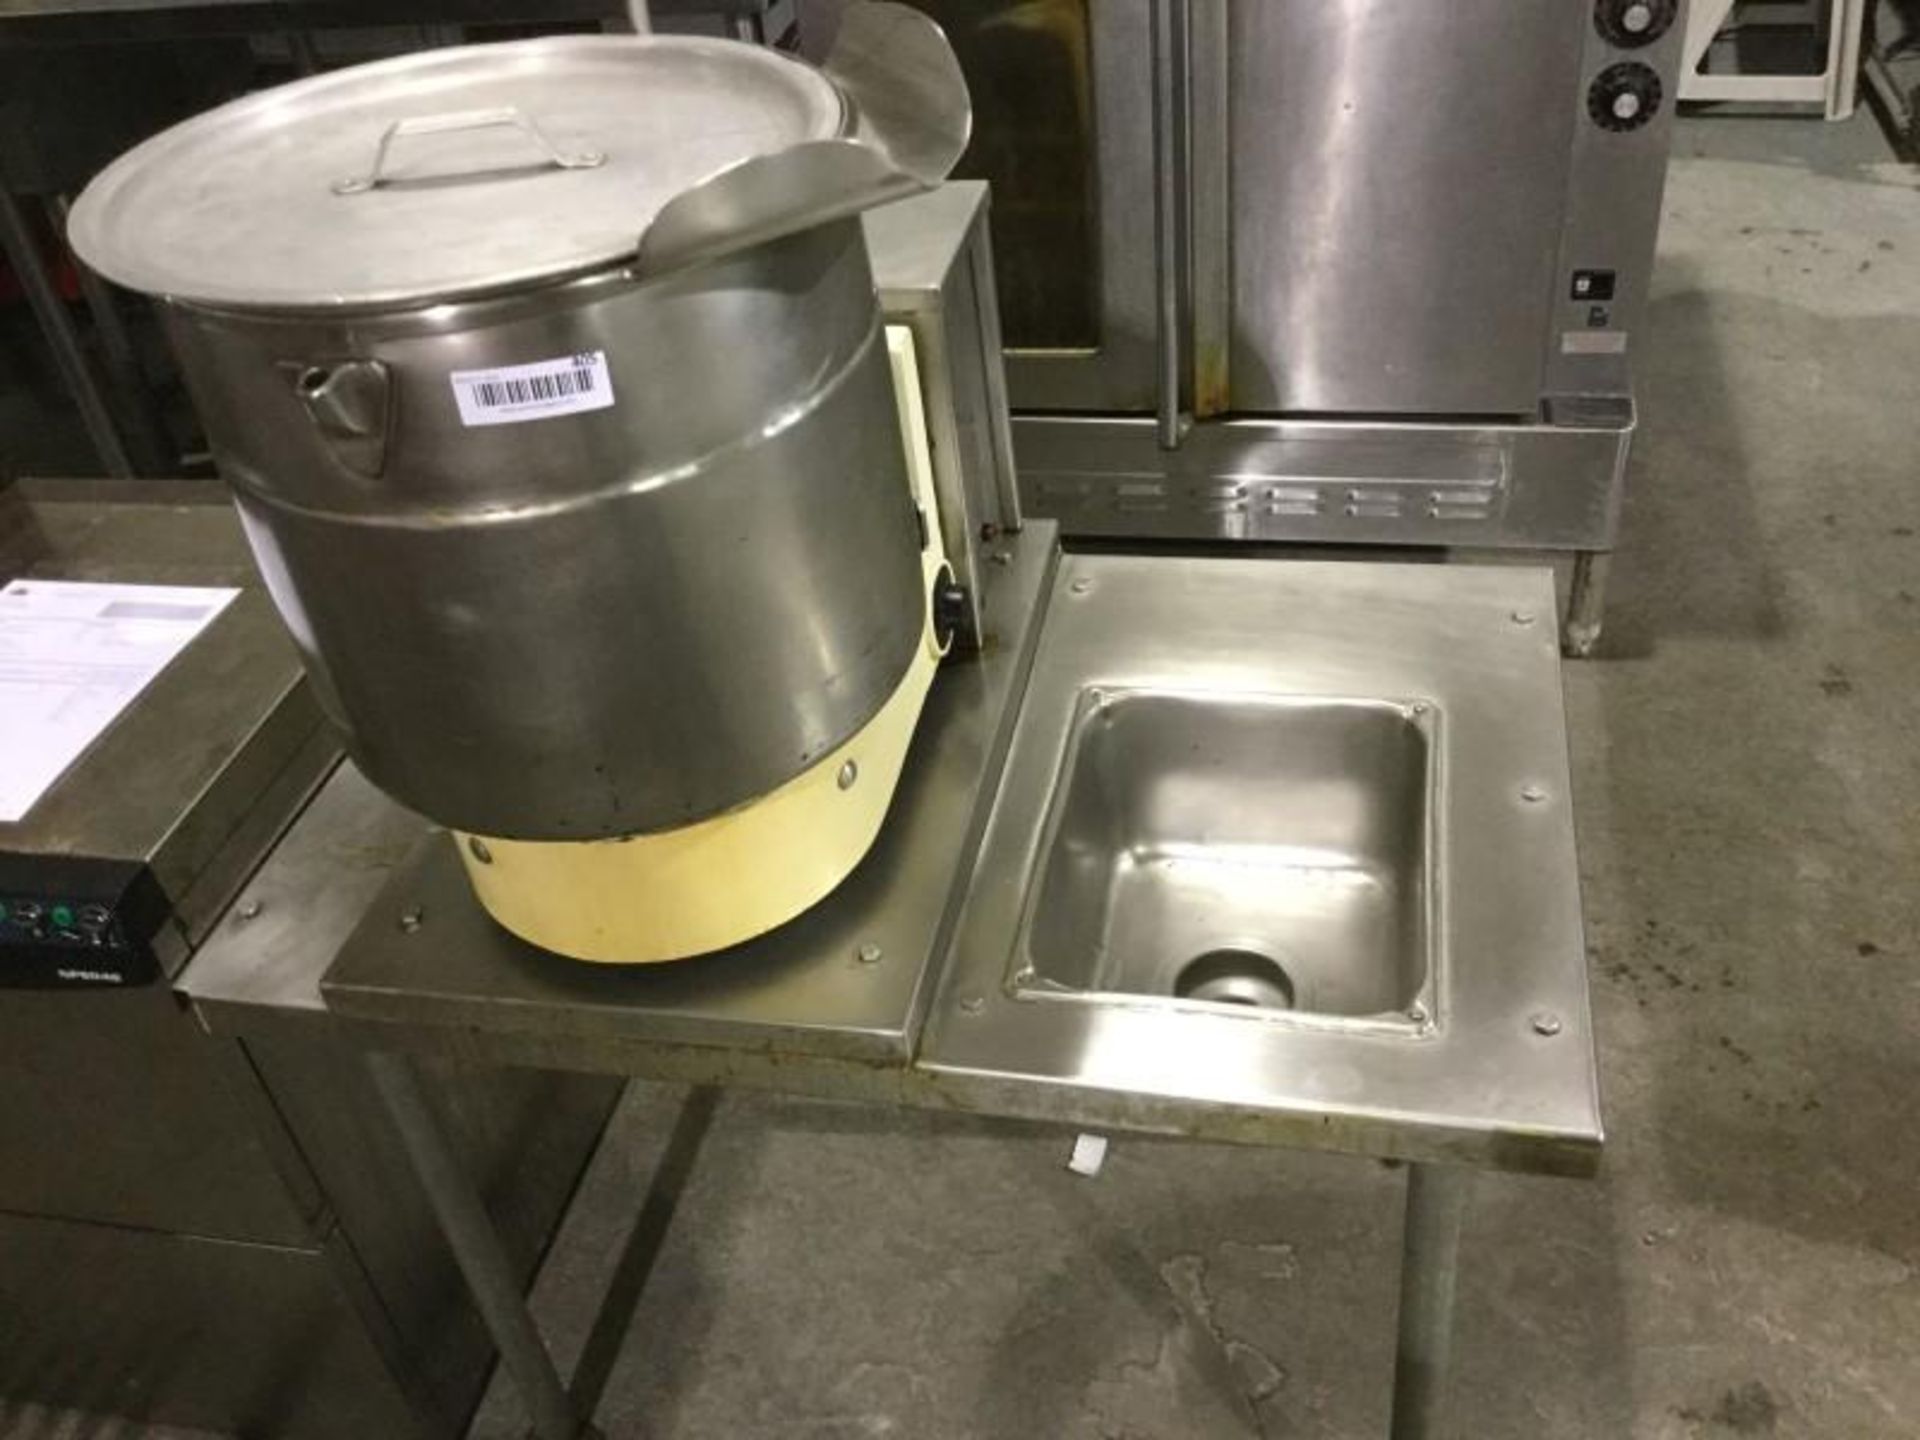 March 21, 2018. Auction - From a Piano to a Sink we have it all. Restaurant Equipment, Returns and M - Image 16 of 20